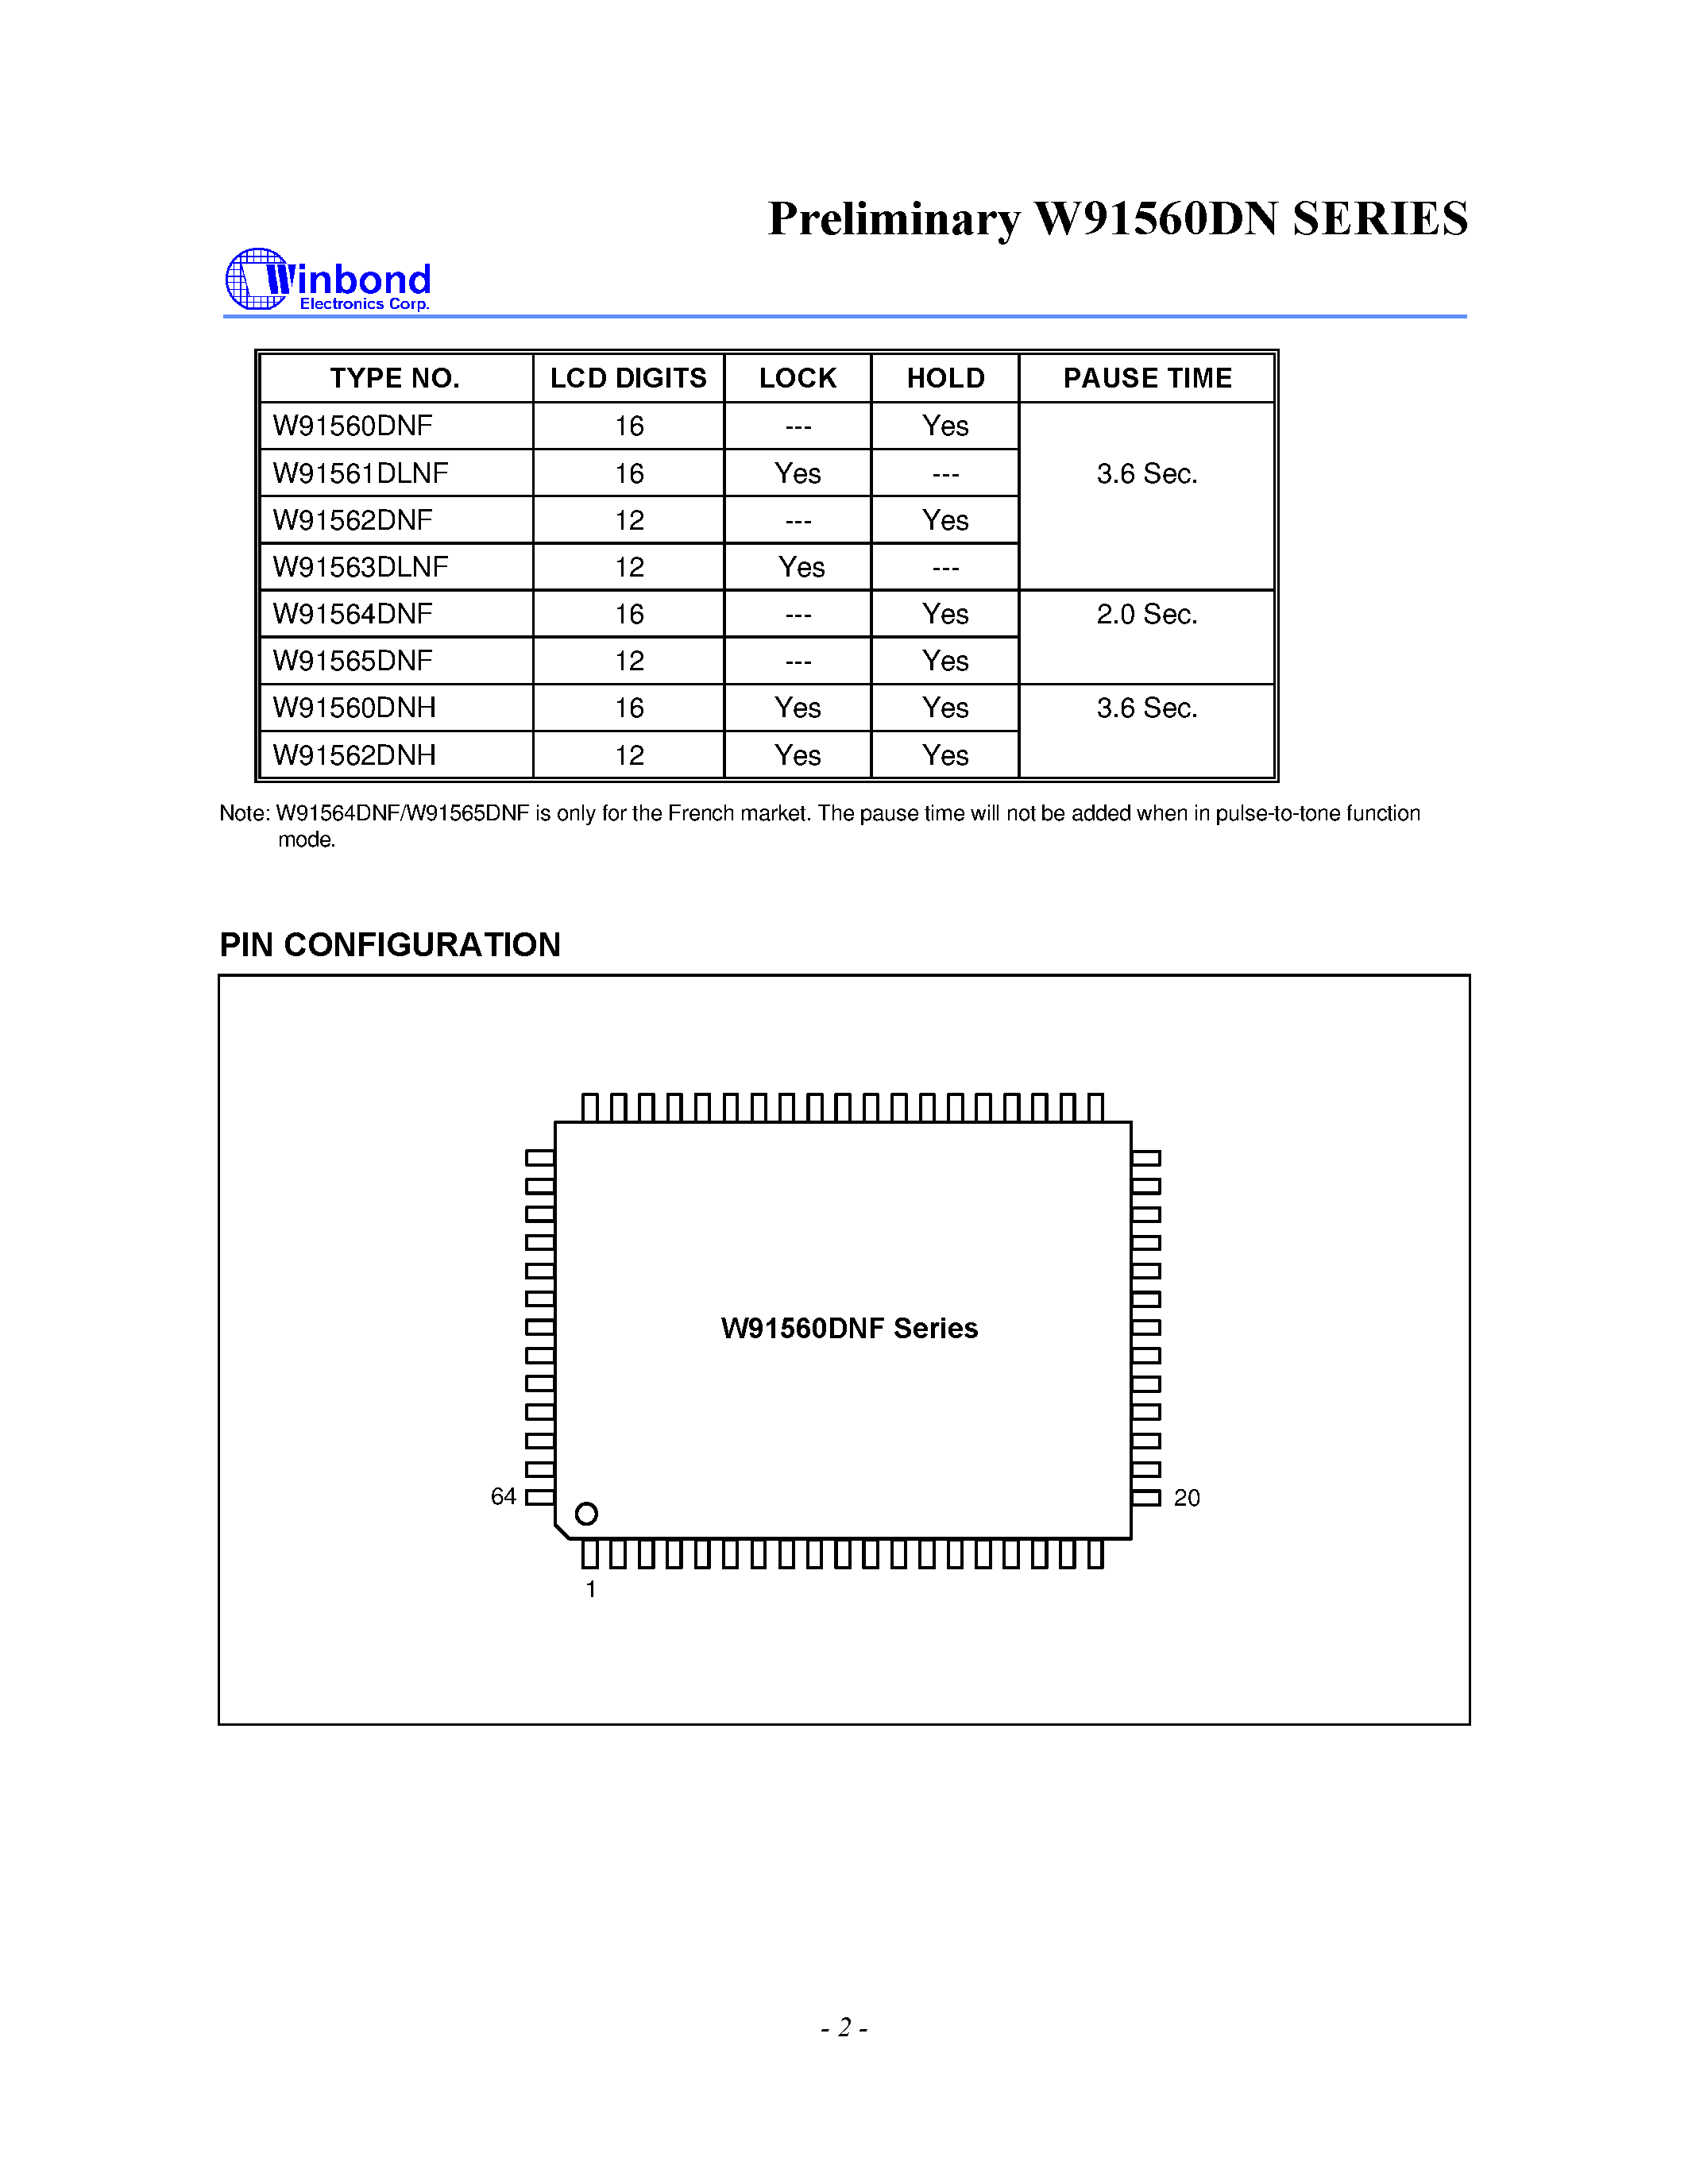 Datasheet W91560DN - 3-MEMORY TONE/PULSE DIALER WITH RTC AND LCD DISPALY FUNCTIONS page 2